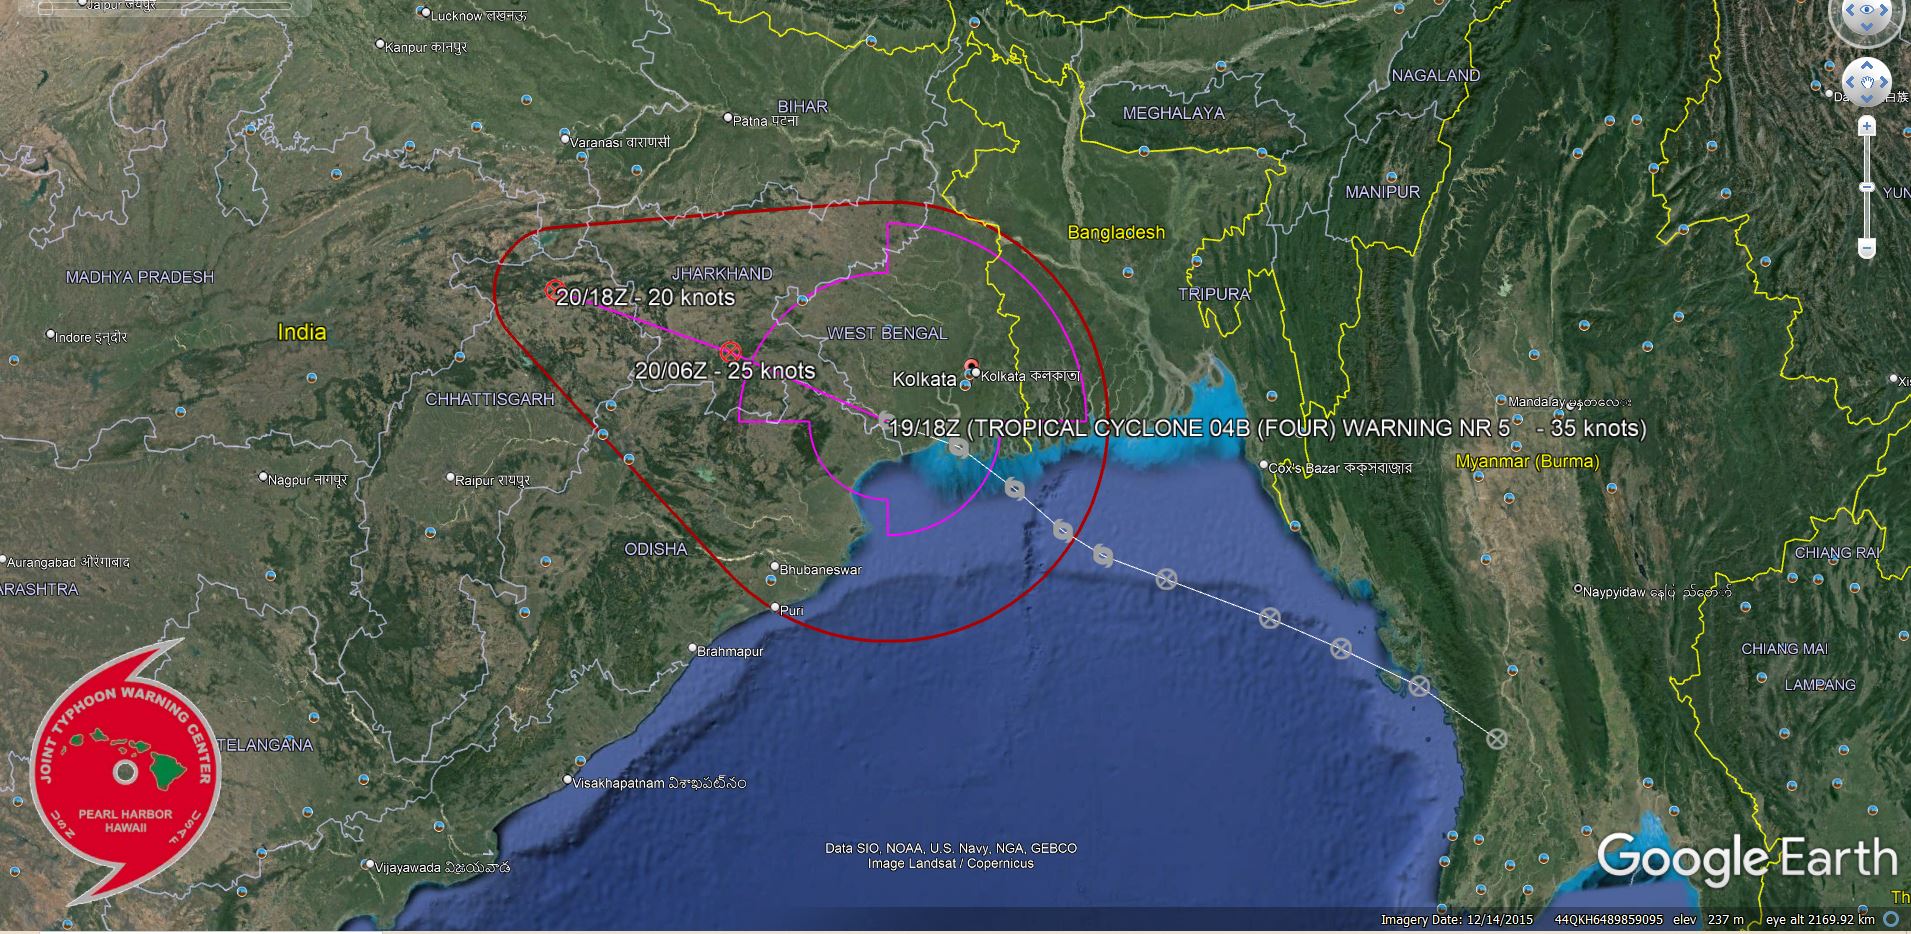 REMARKS: 192100Z POSITION NEAR 22.2N 86.8E. 19AUG22. TROPICAL CYCLONE 04B (FOUR), LOCATED APPROXIMATELY 71 NM WEST-SOUTHWEST OF KOLKATA, INDIA, HAS TRACKED WEST-NORTHWESTWARD AT 09 KNOTS OVER THE PAST SIX HOURS. ANIMATED ENHANCED INFRARED SATELLITE IMAGERY AND SURFACE OBSERVATION FROM THE COASTAL REGION OF KOLKATA INDICATE THE SYSTEM HAS MADE LANDFALL OVER THE PAST  FEW HOURS. AS THE SYSTEM CONTINUES TO TRACK WEST-NORTHWESTWARD  OVER EASTERN INDIA, THE SYSTEM IS FORECAST TO QUICKLY DEGRADE  BEFORE EVENTUALLY DISSIPATING BETWEEN TAUS 12 AND 24. THIS IS THE FINAL WARNING ON THIS SYSTEM BY THE JOINT TYPHOON WRNCEN PEARL  HARBOR HI.